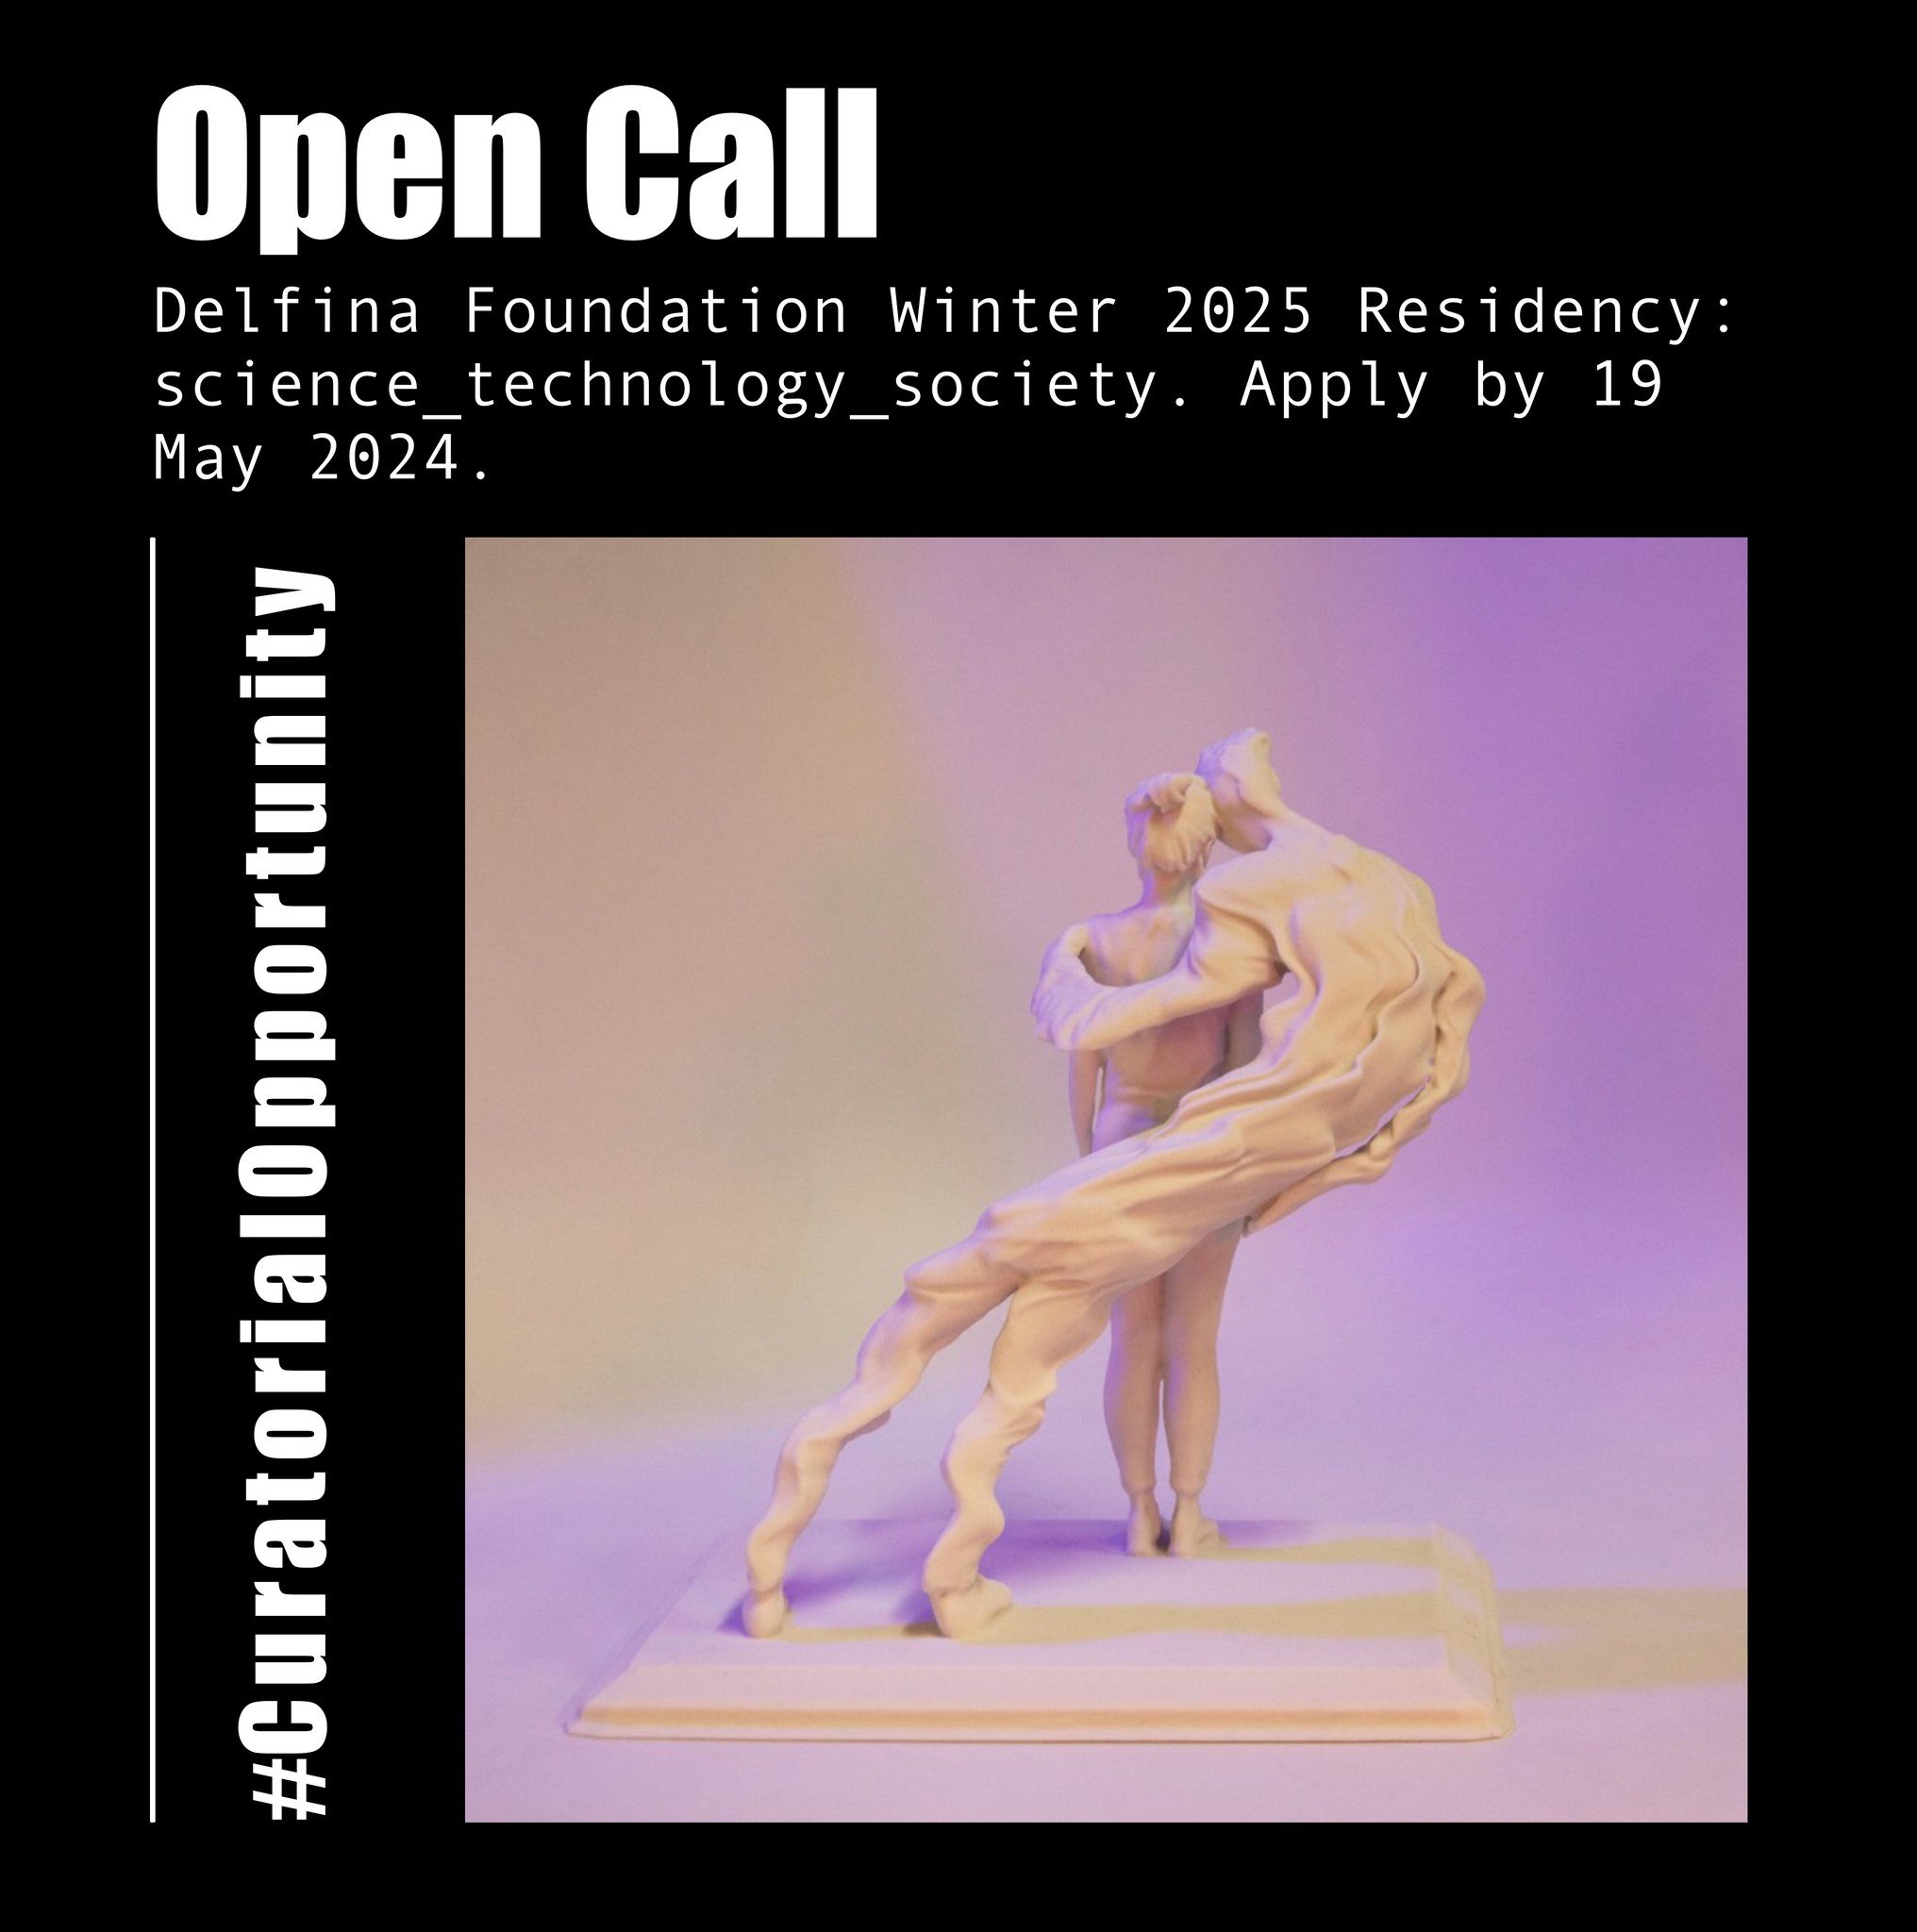 Delfina Foundation @delfinafdn is pleased to announce an international open call for its upcoming winter 2025 residency season under its recurring thematic programme science_technology_society. 

They are looking for artists, curators, researchers, t